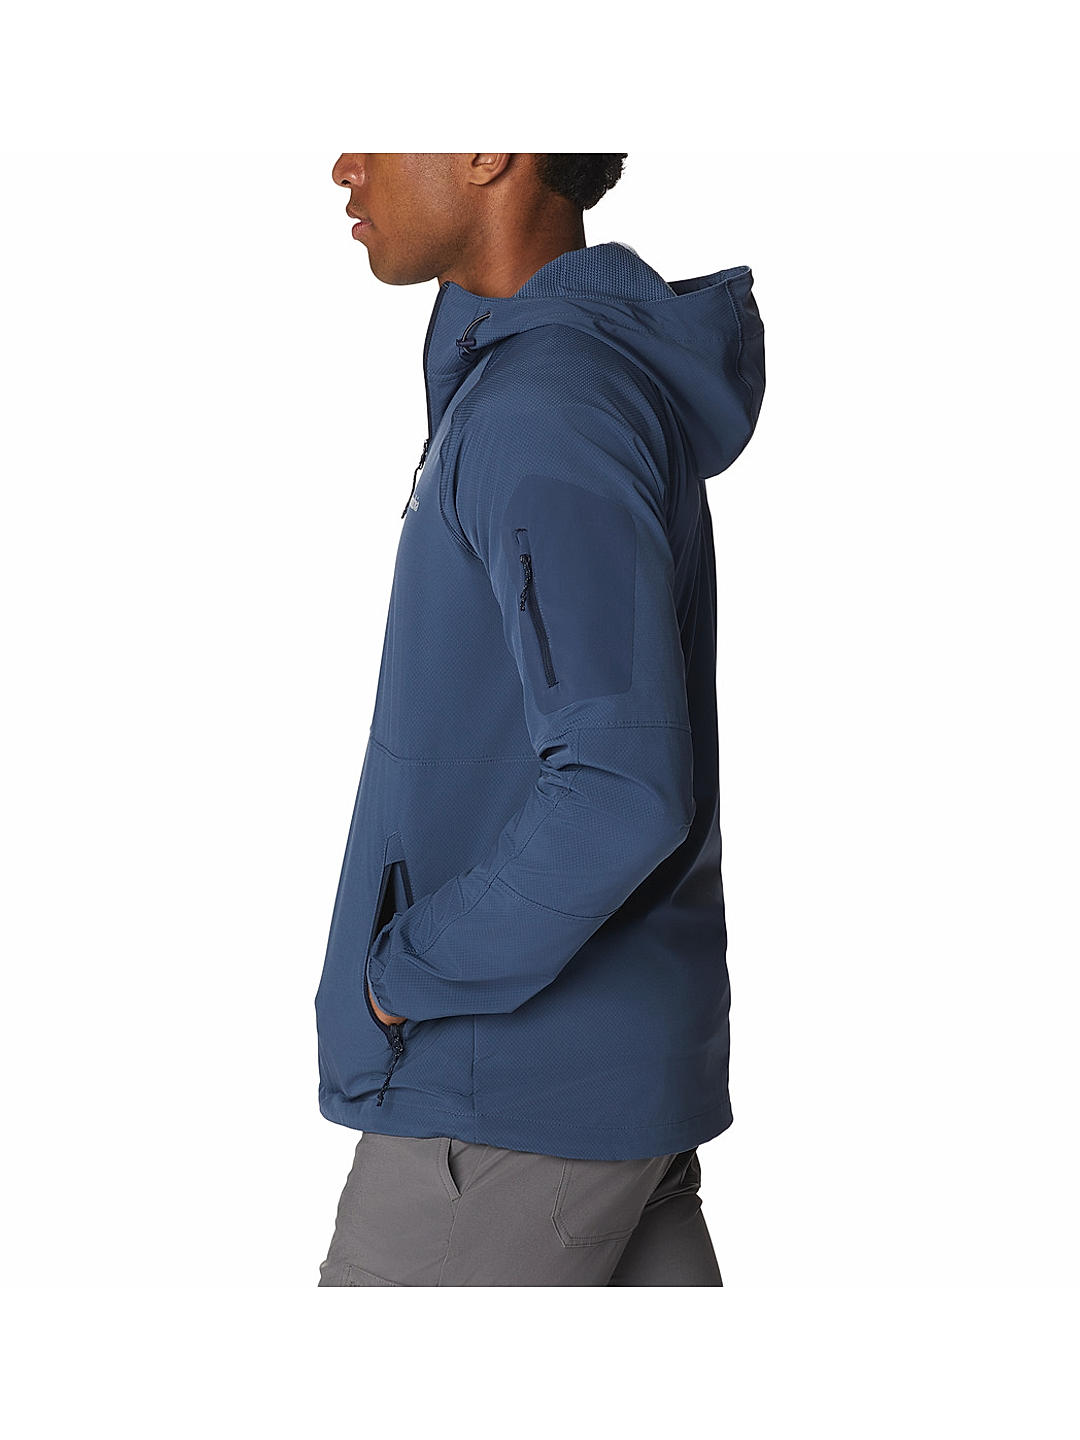 Columbia Men Navy / Blue Tall Heights Hooded Softshell